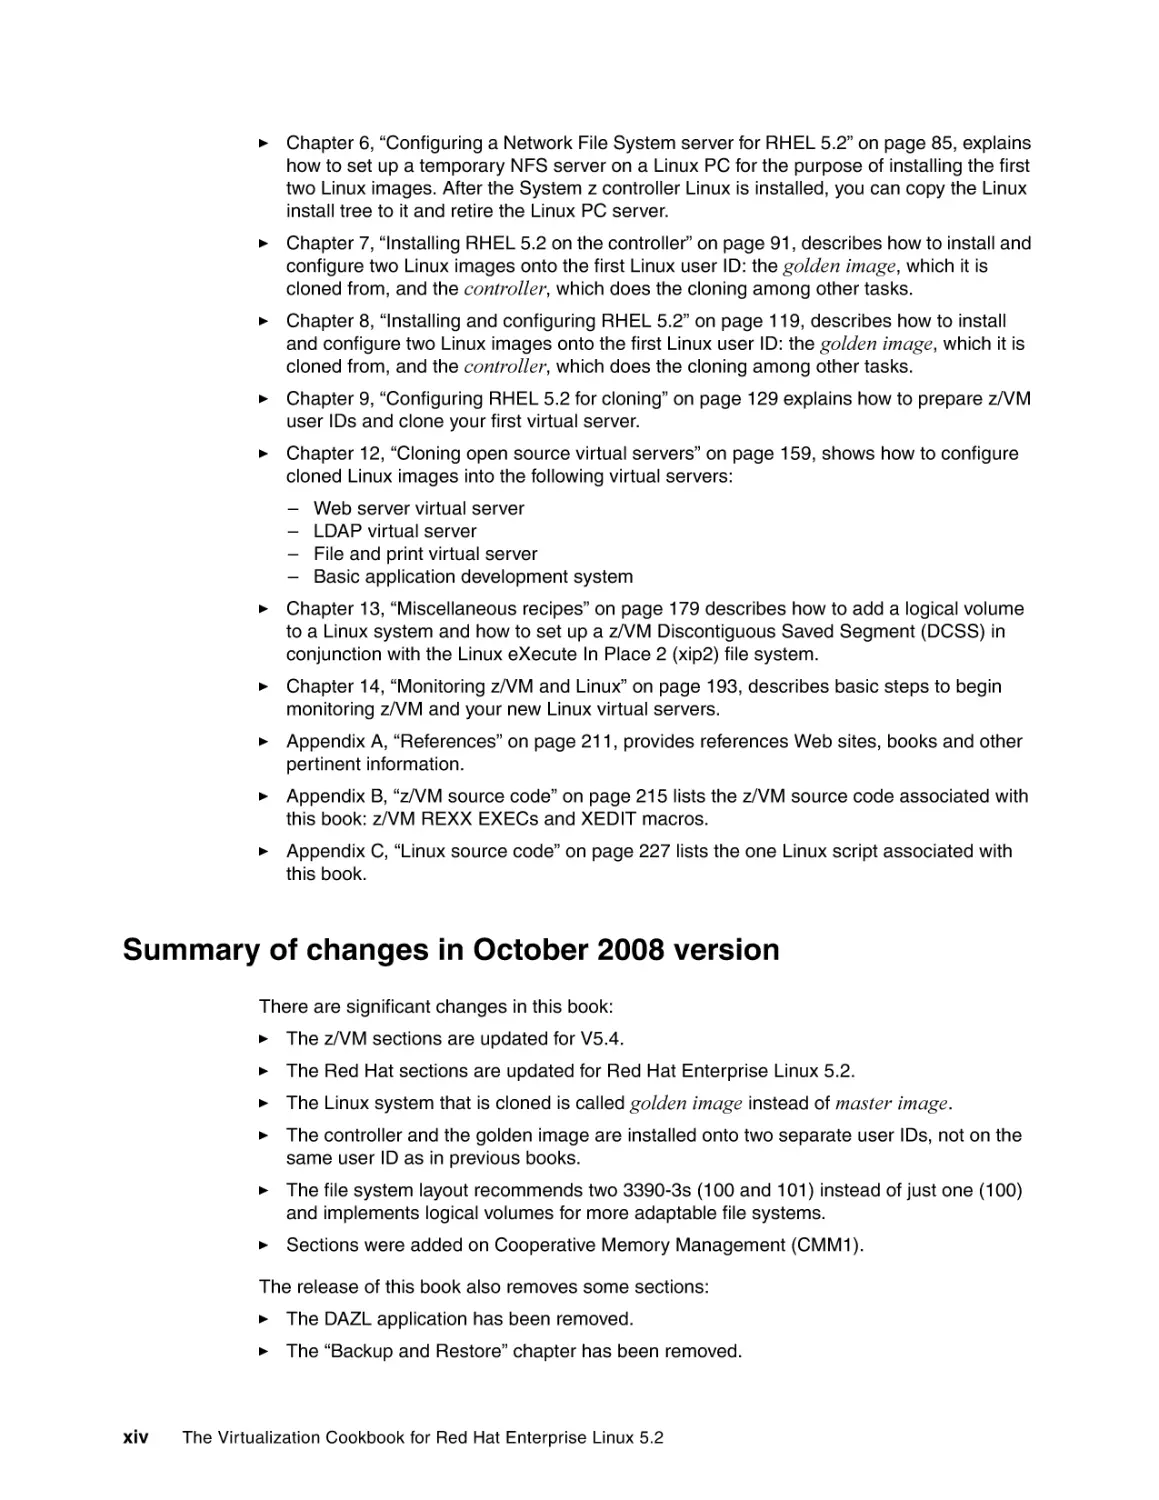 Summary of changes in October 2008 version